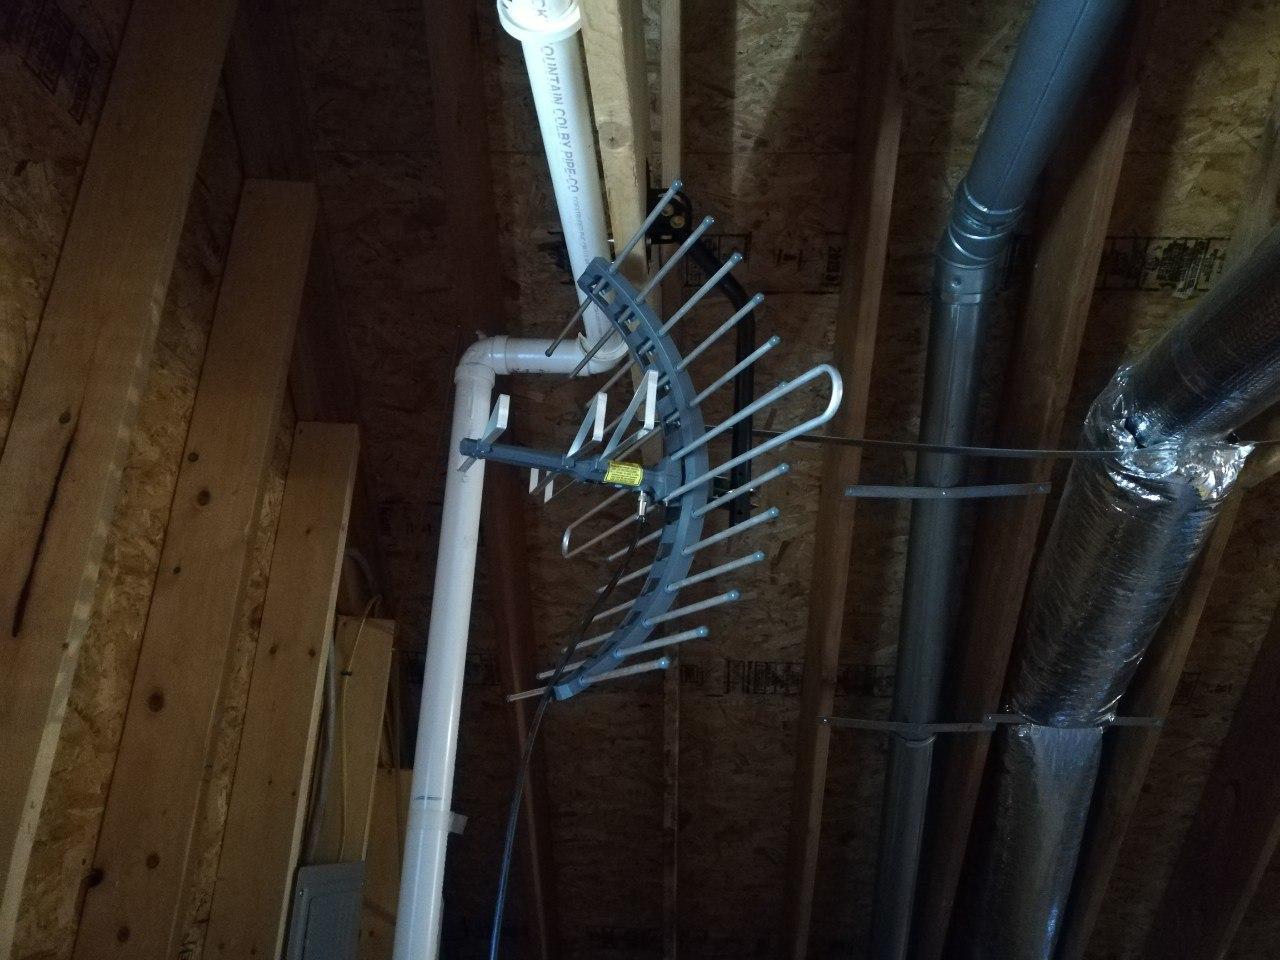 Antenna Mounted in Attic